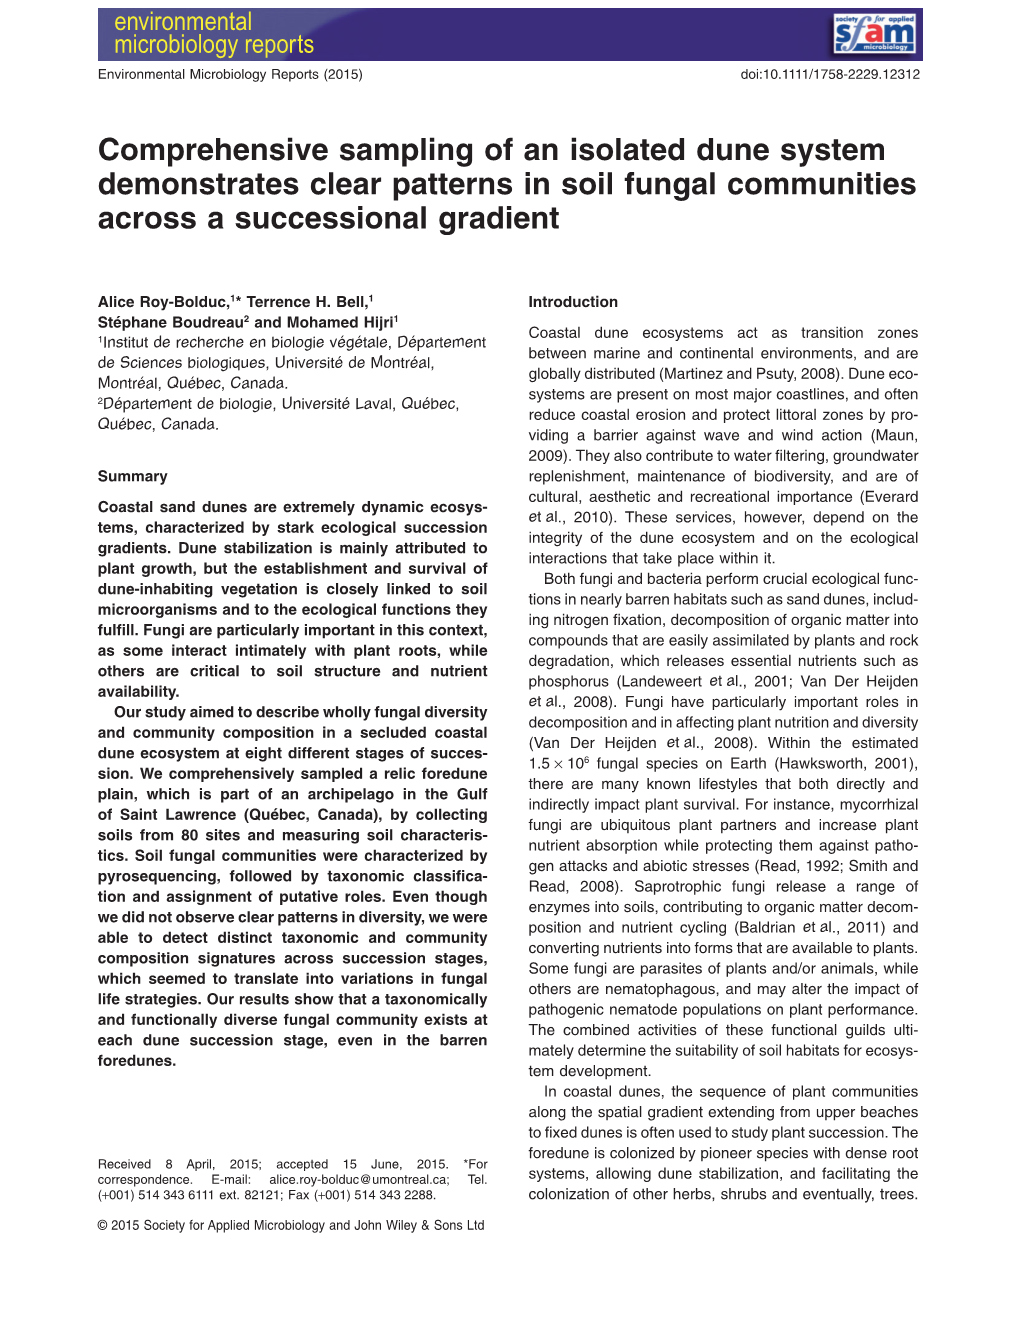 Comprehensive Sampling of an Isolated Dune System Demonstrates Clear Patterns in Soil Fungal Communities Across a Successional Gradient